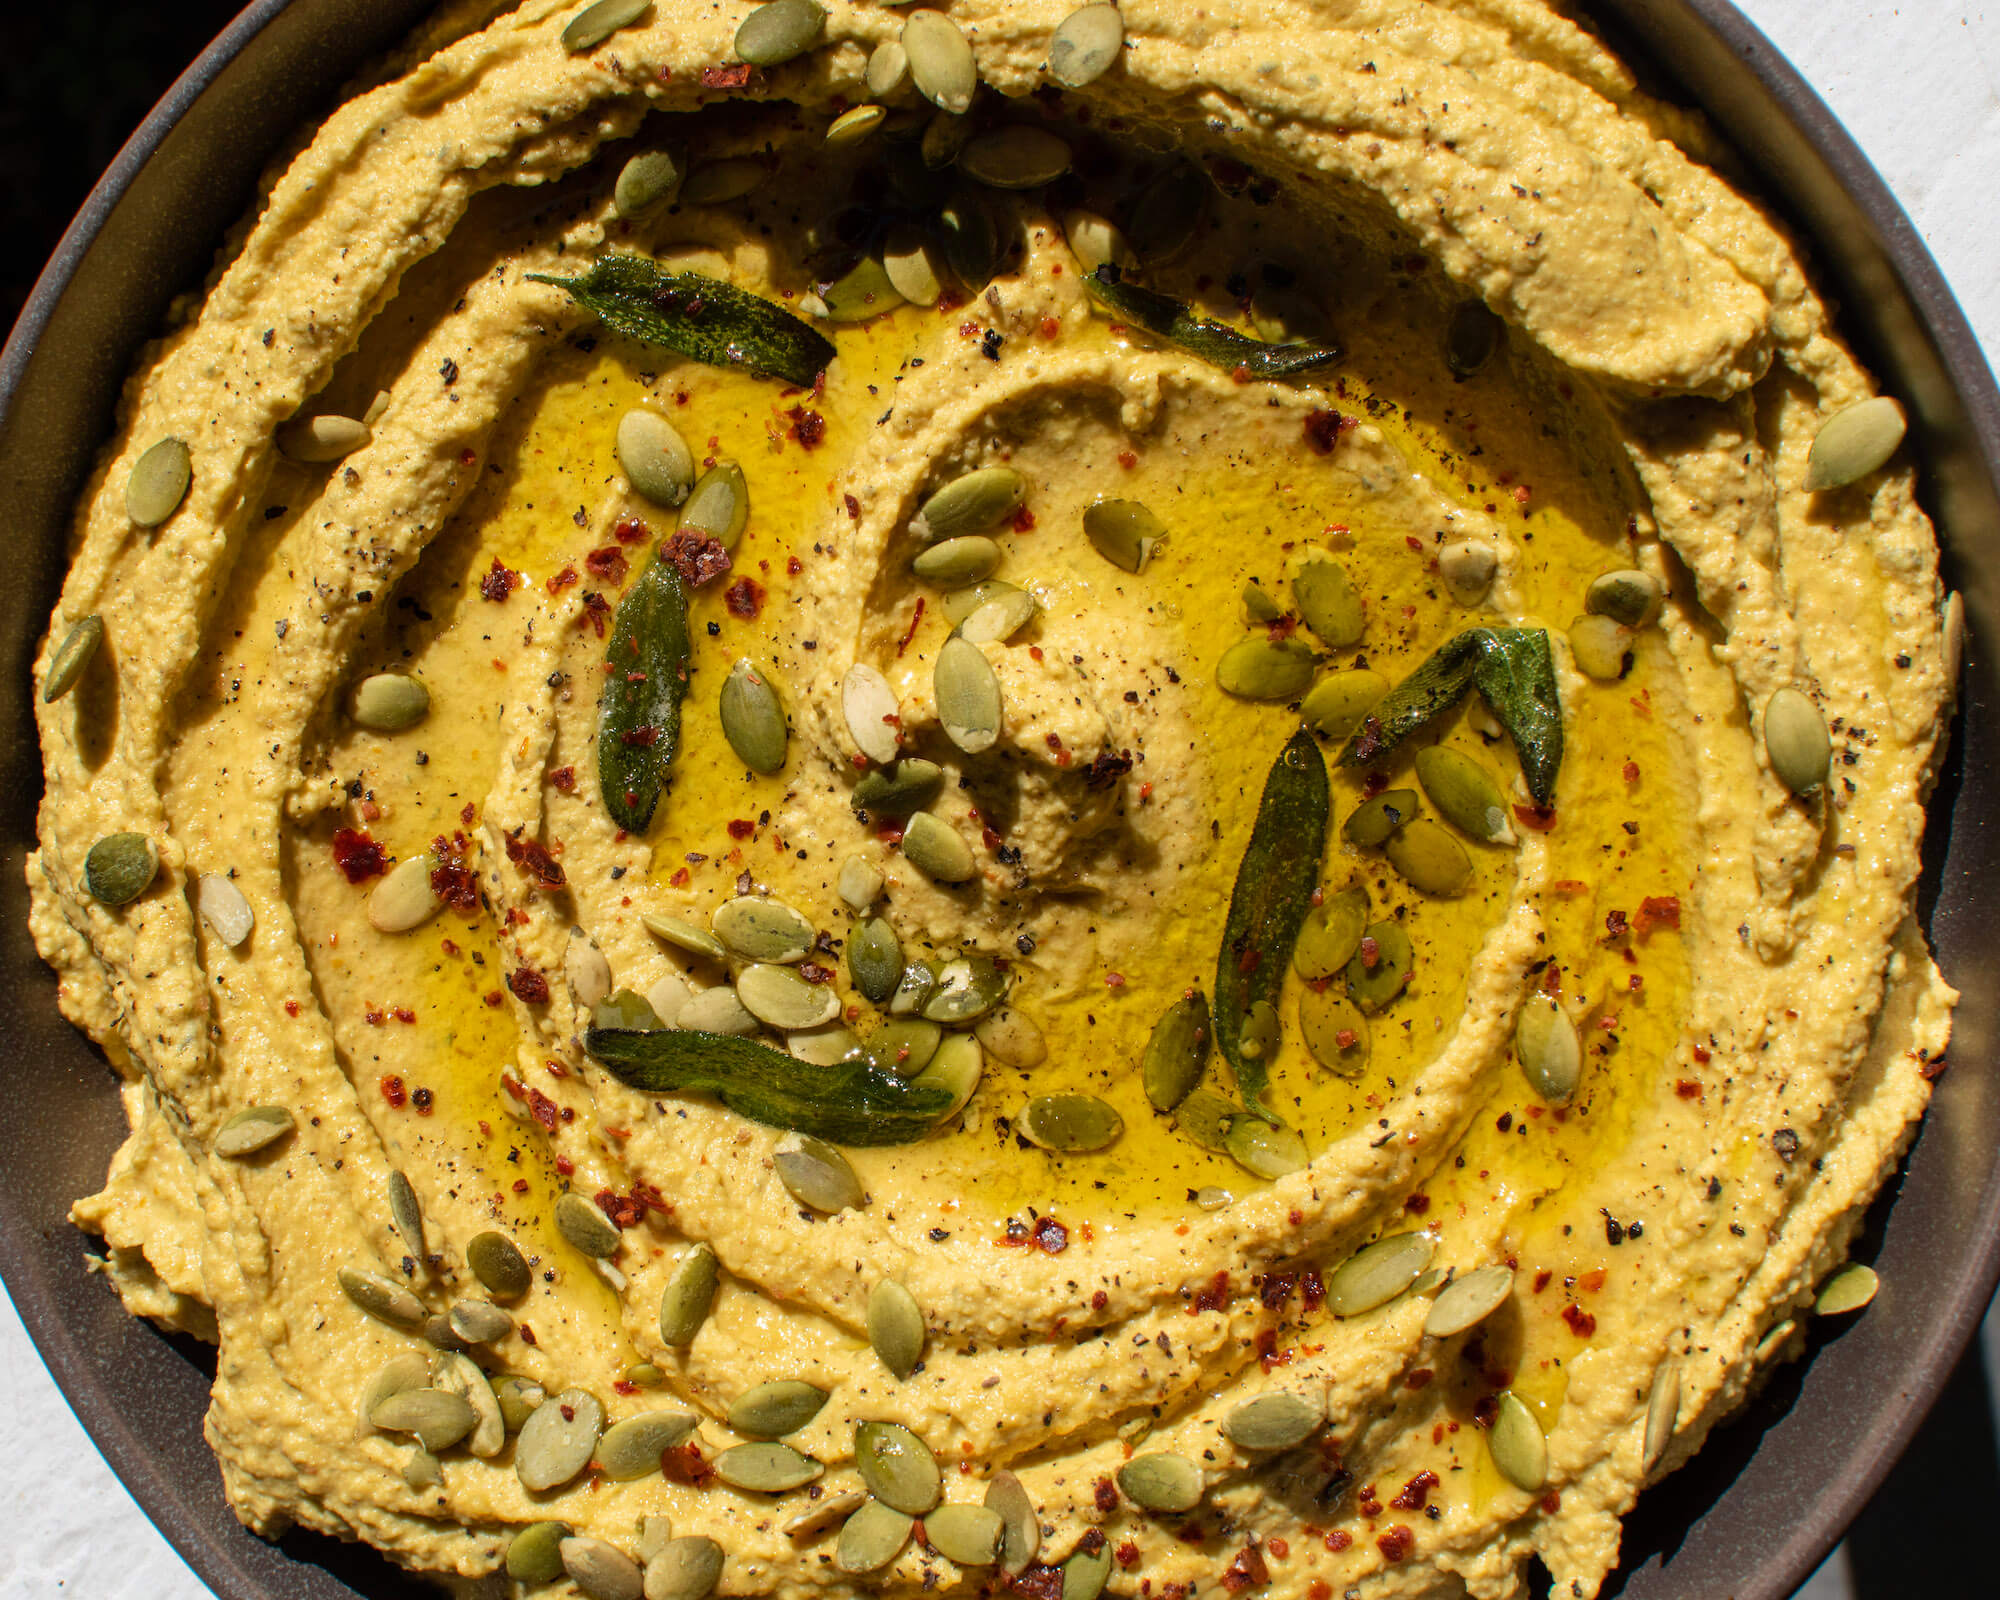 Pumpkin Hummus with Go Raw Sprouted Pumpkin Seeds